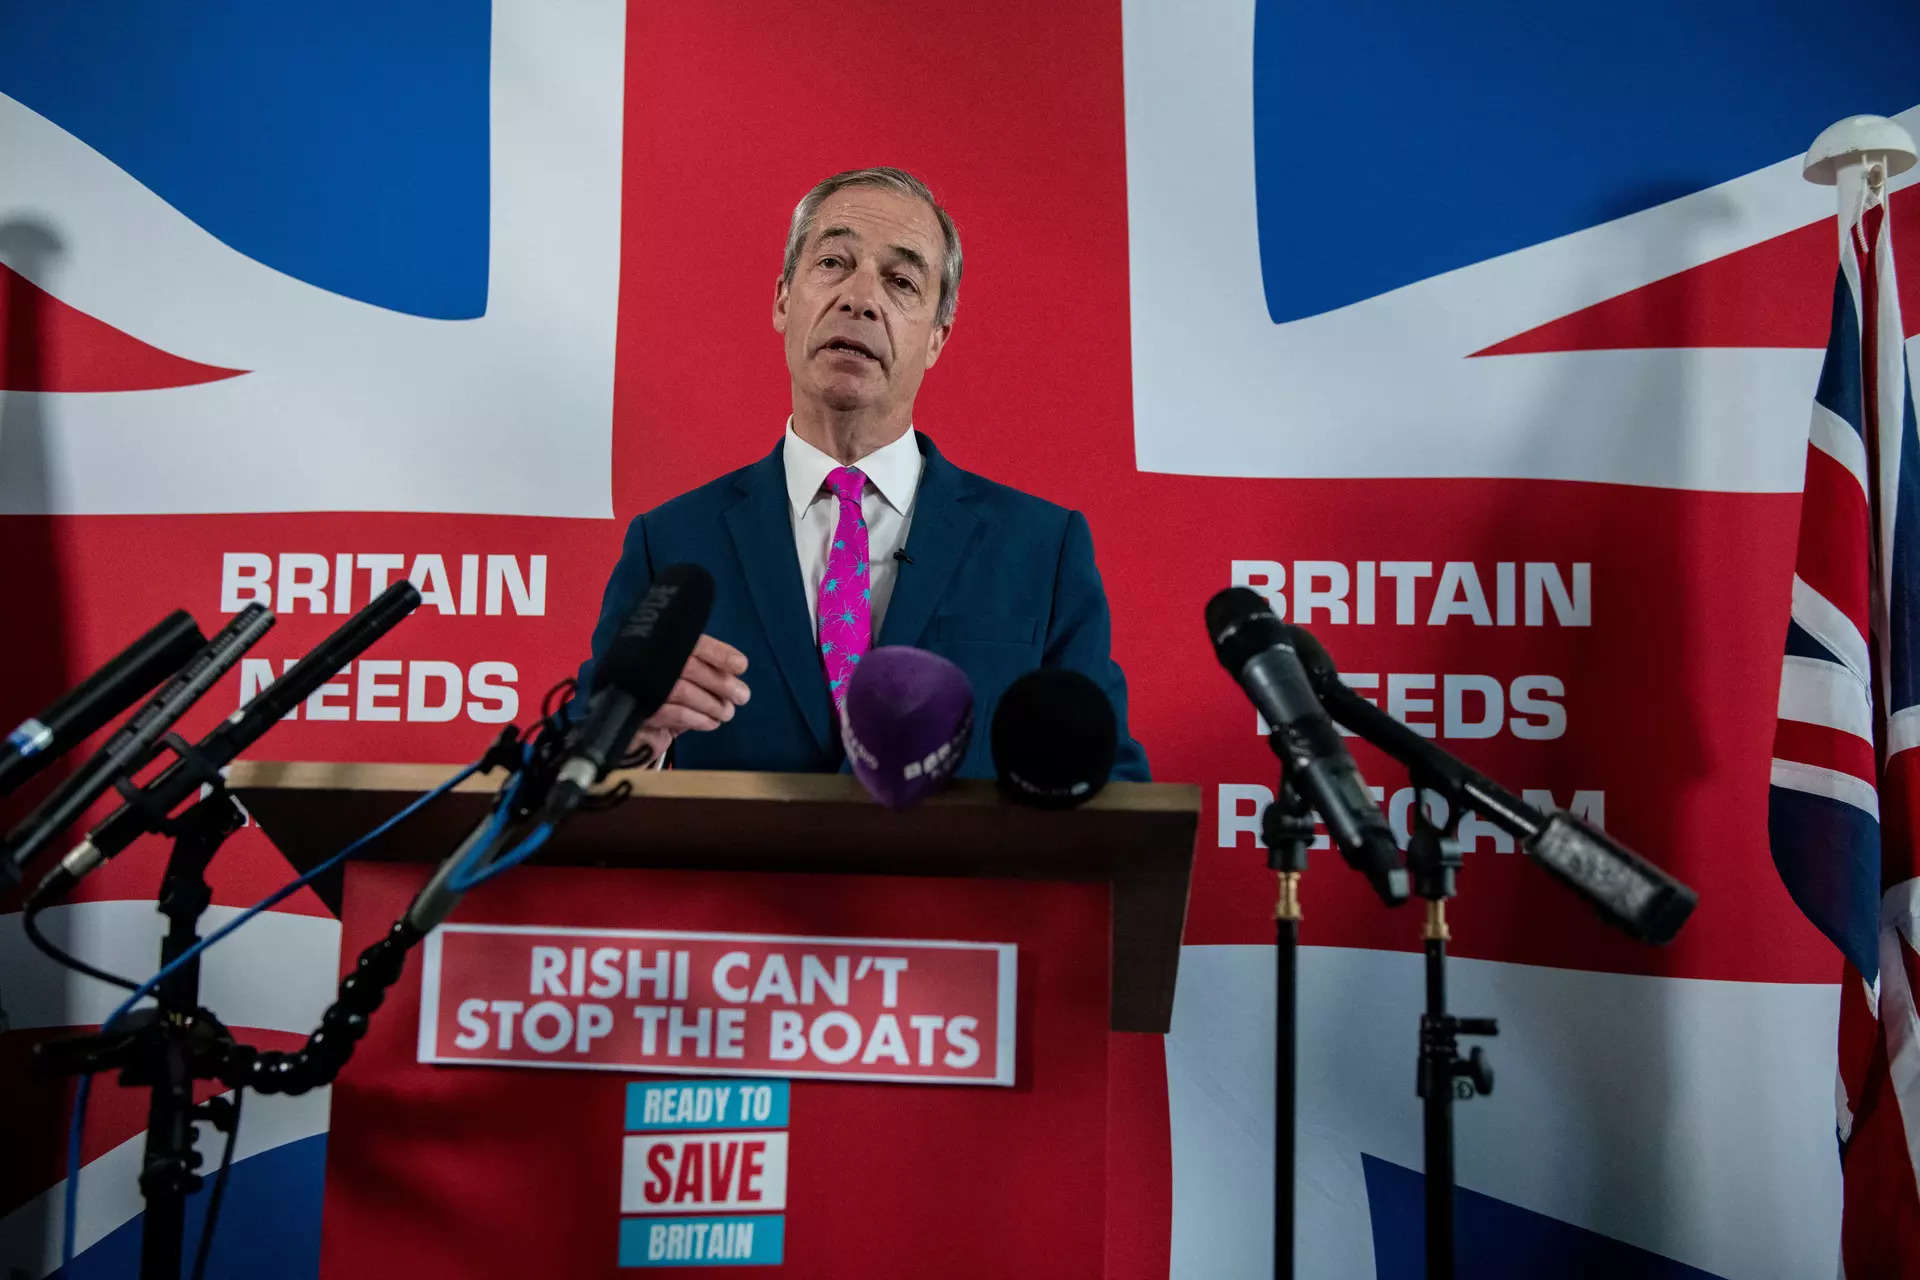 'Join the revolt': UK's Farage to lay out election policies 